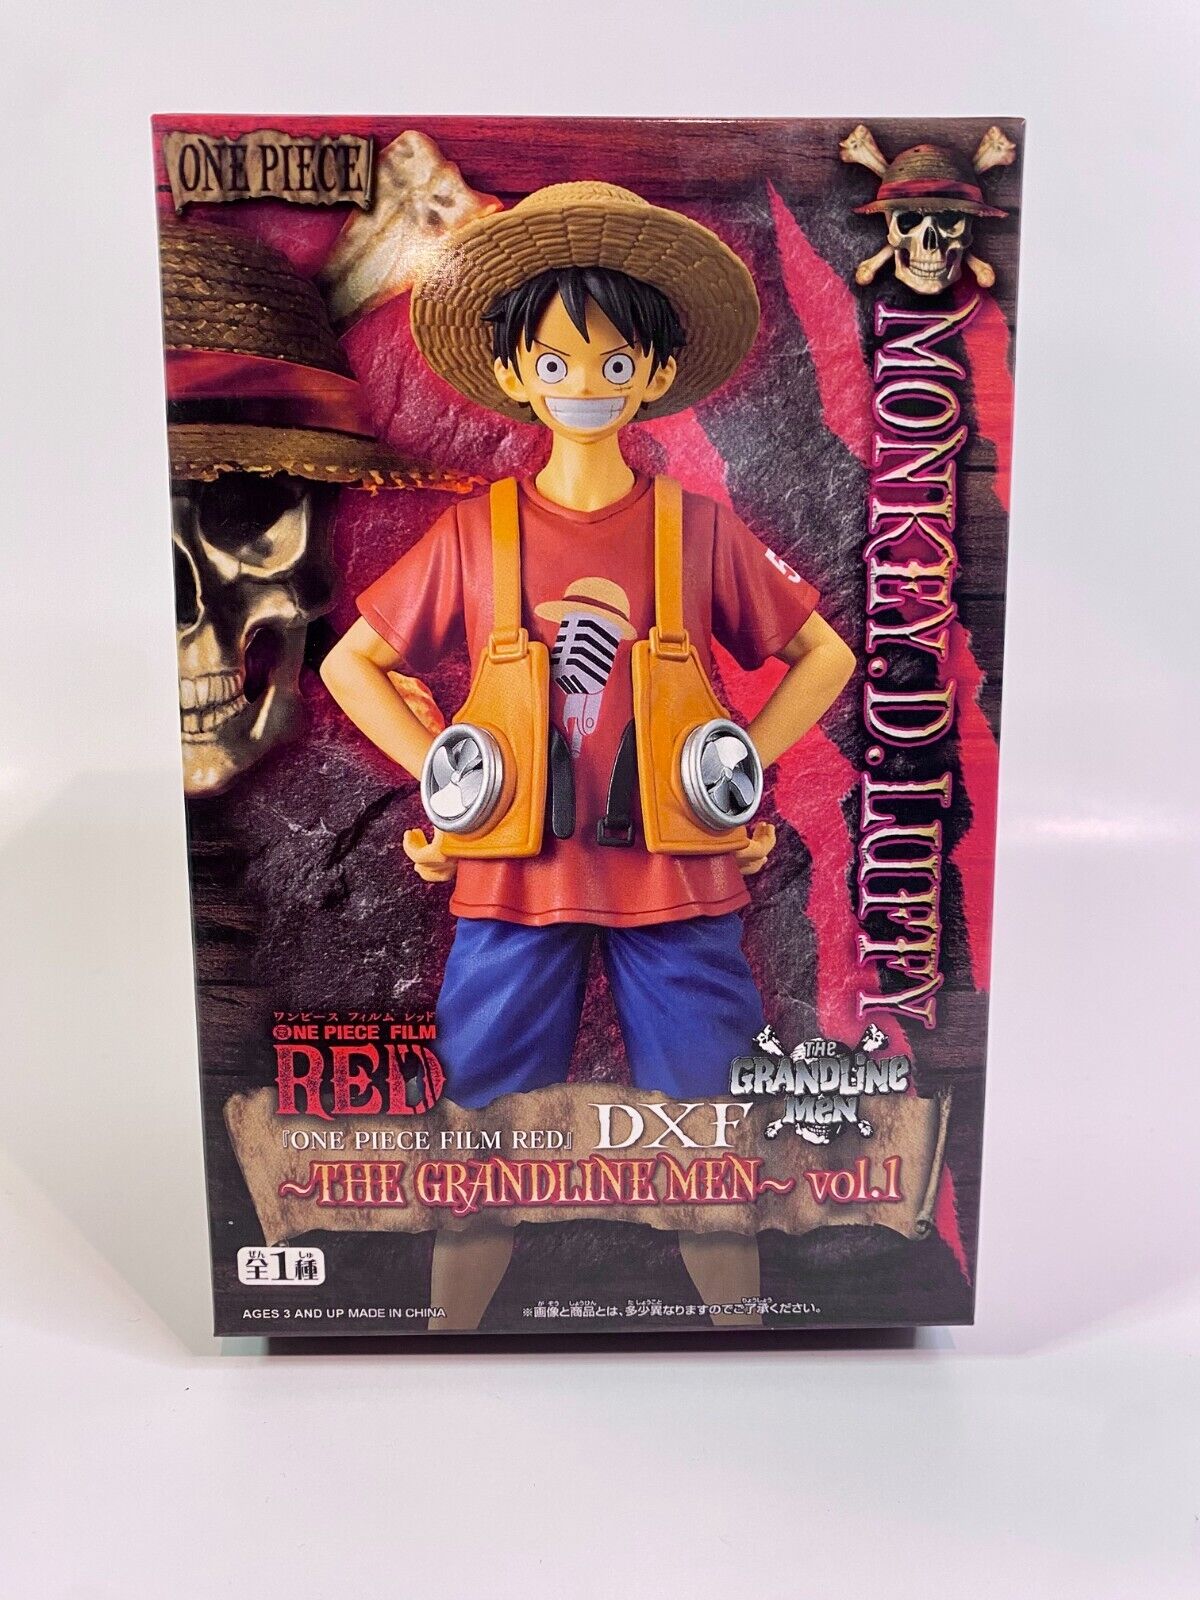 One Piece Film RED Figures (You choose the figure you want)